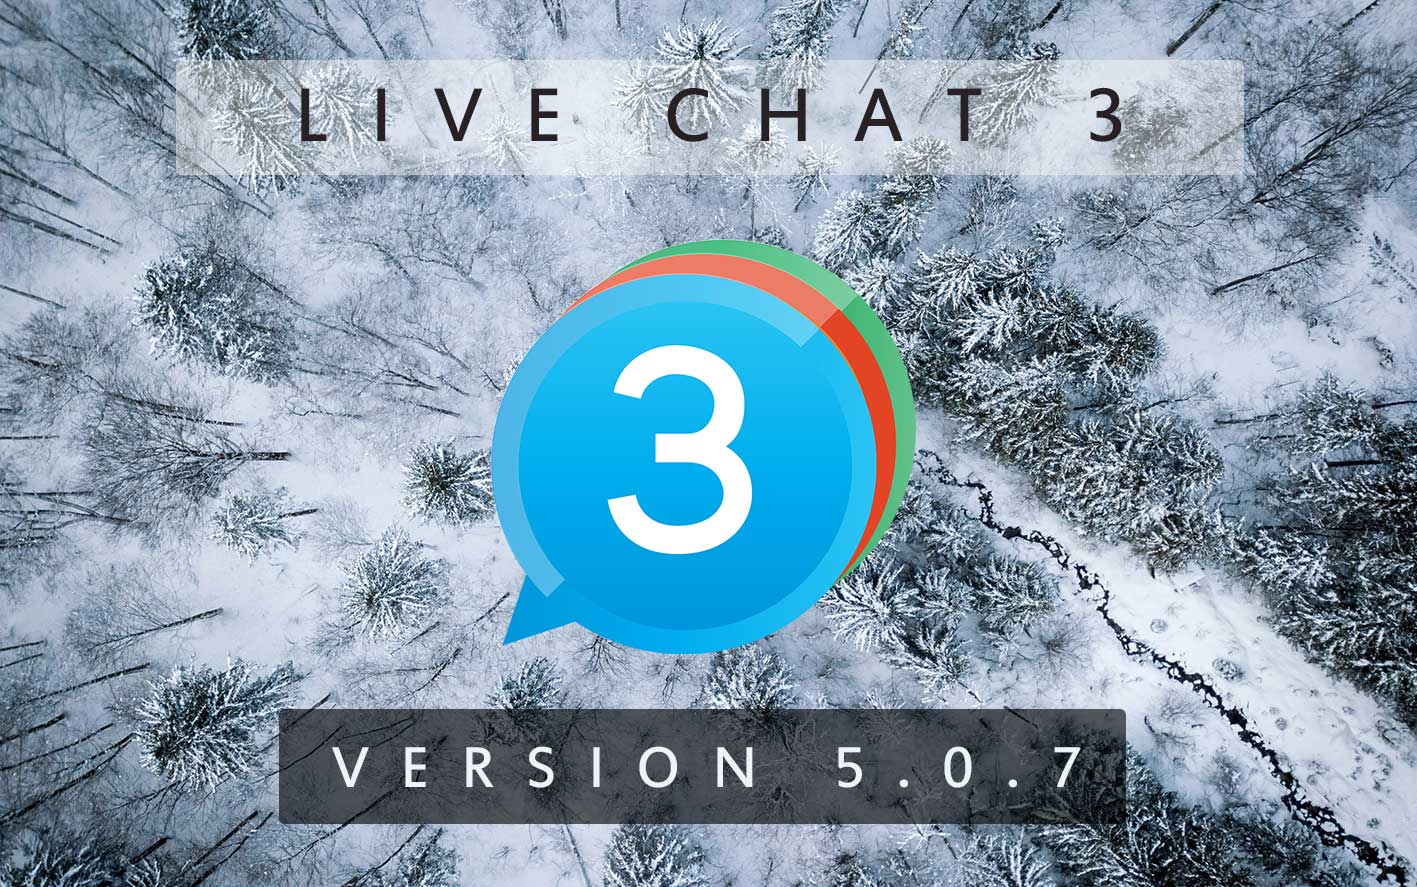 Live Chat 3 - Version 5.0.7